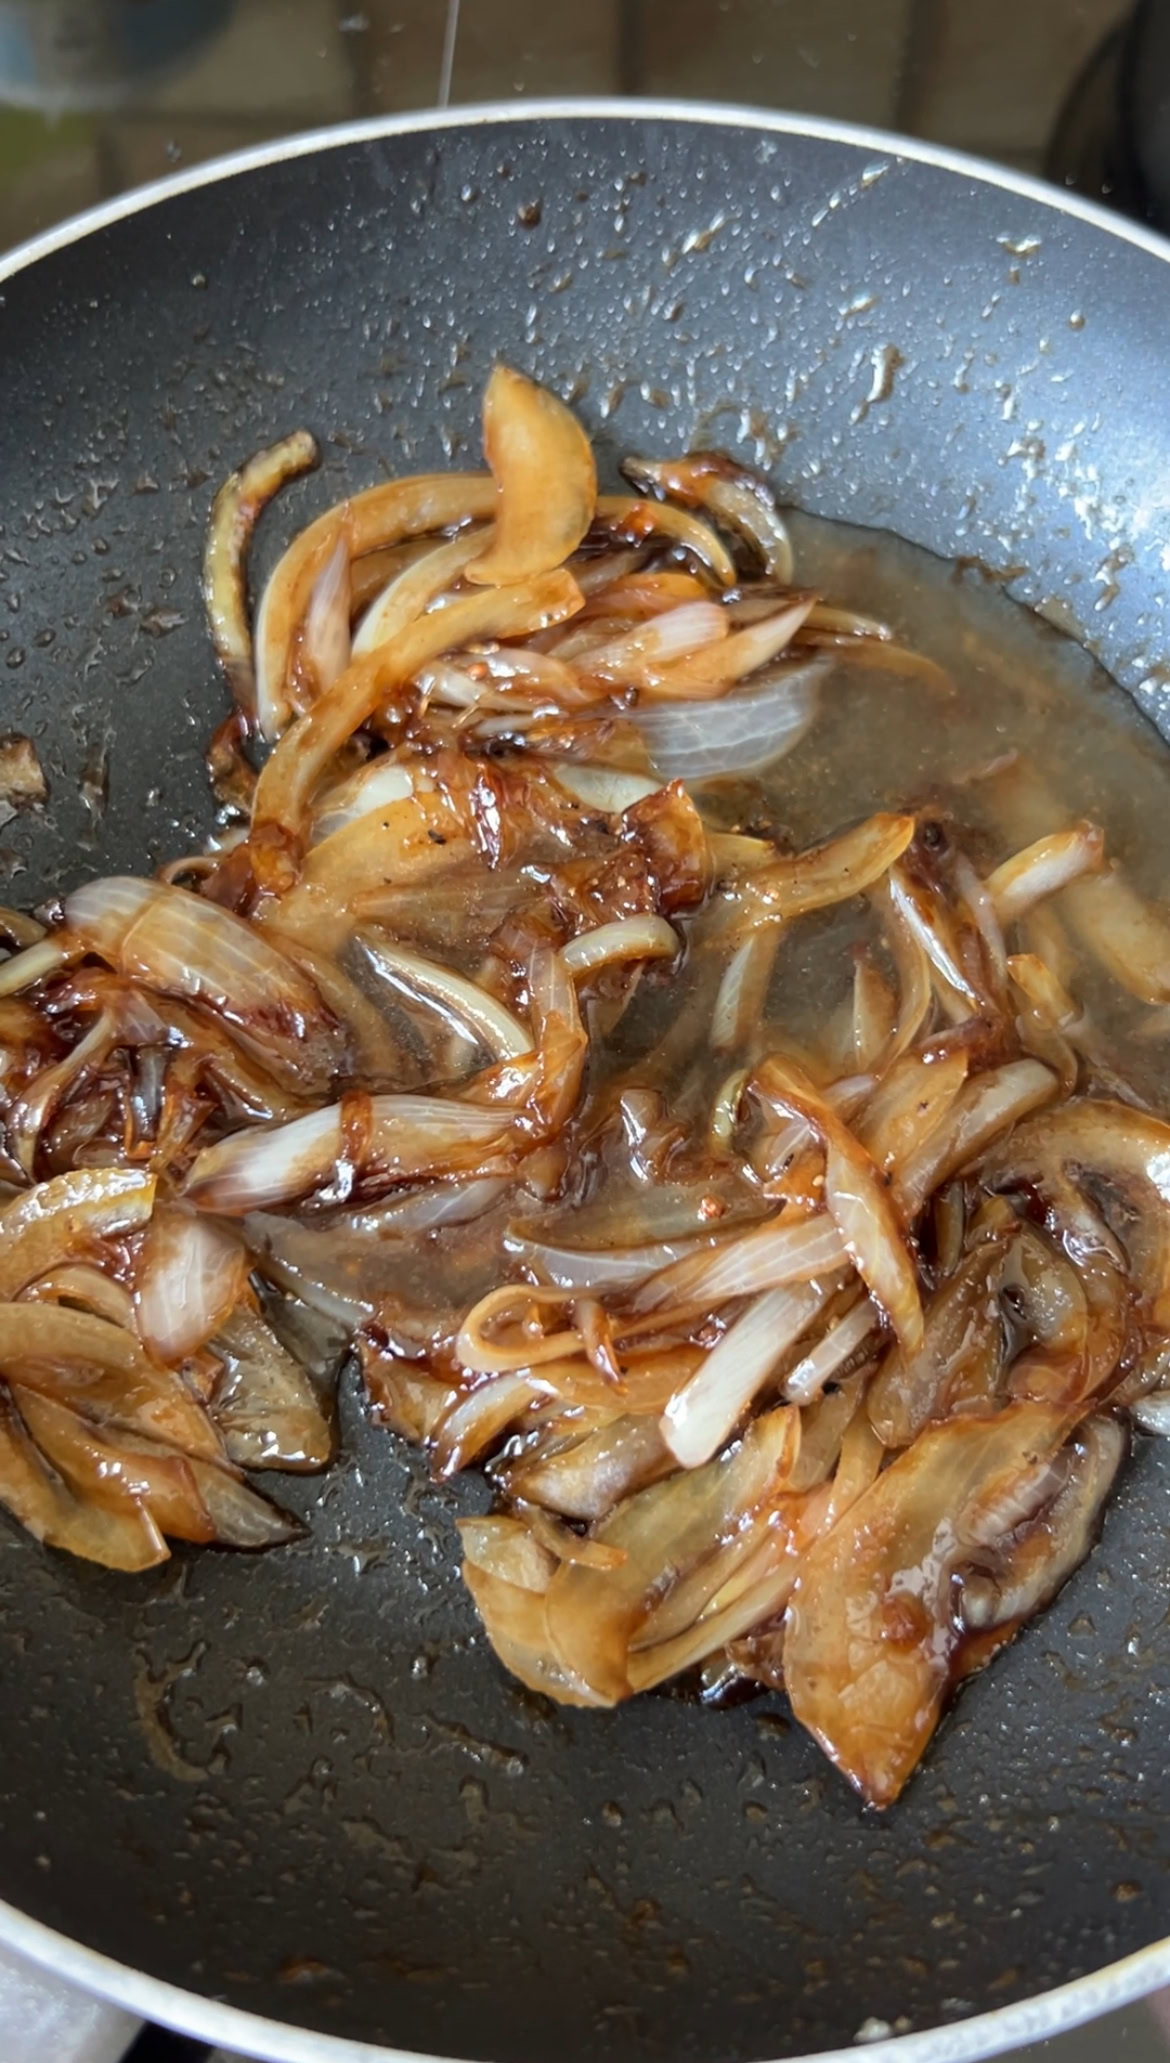 Water added to pan-fried onion slices.